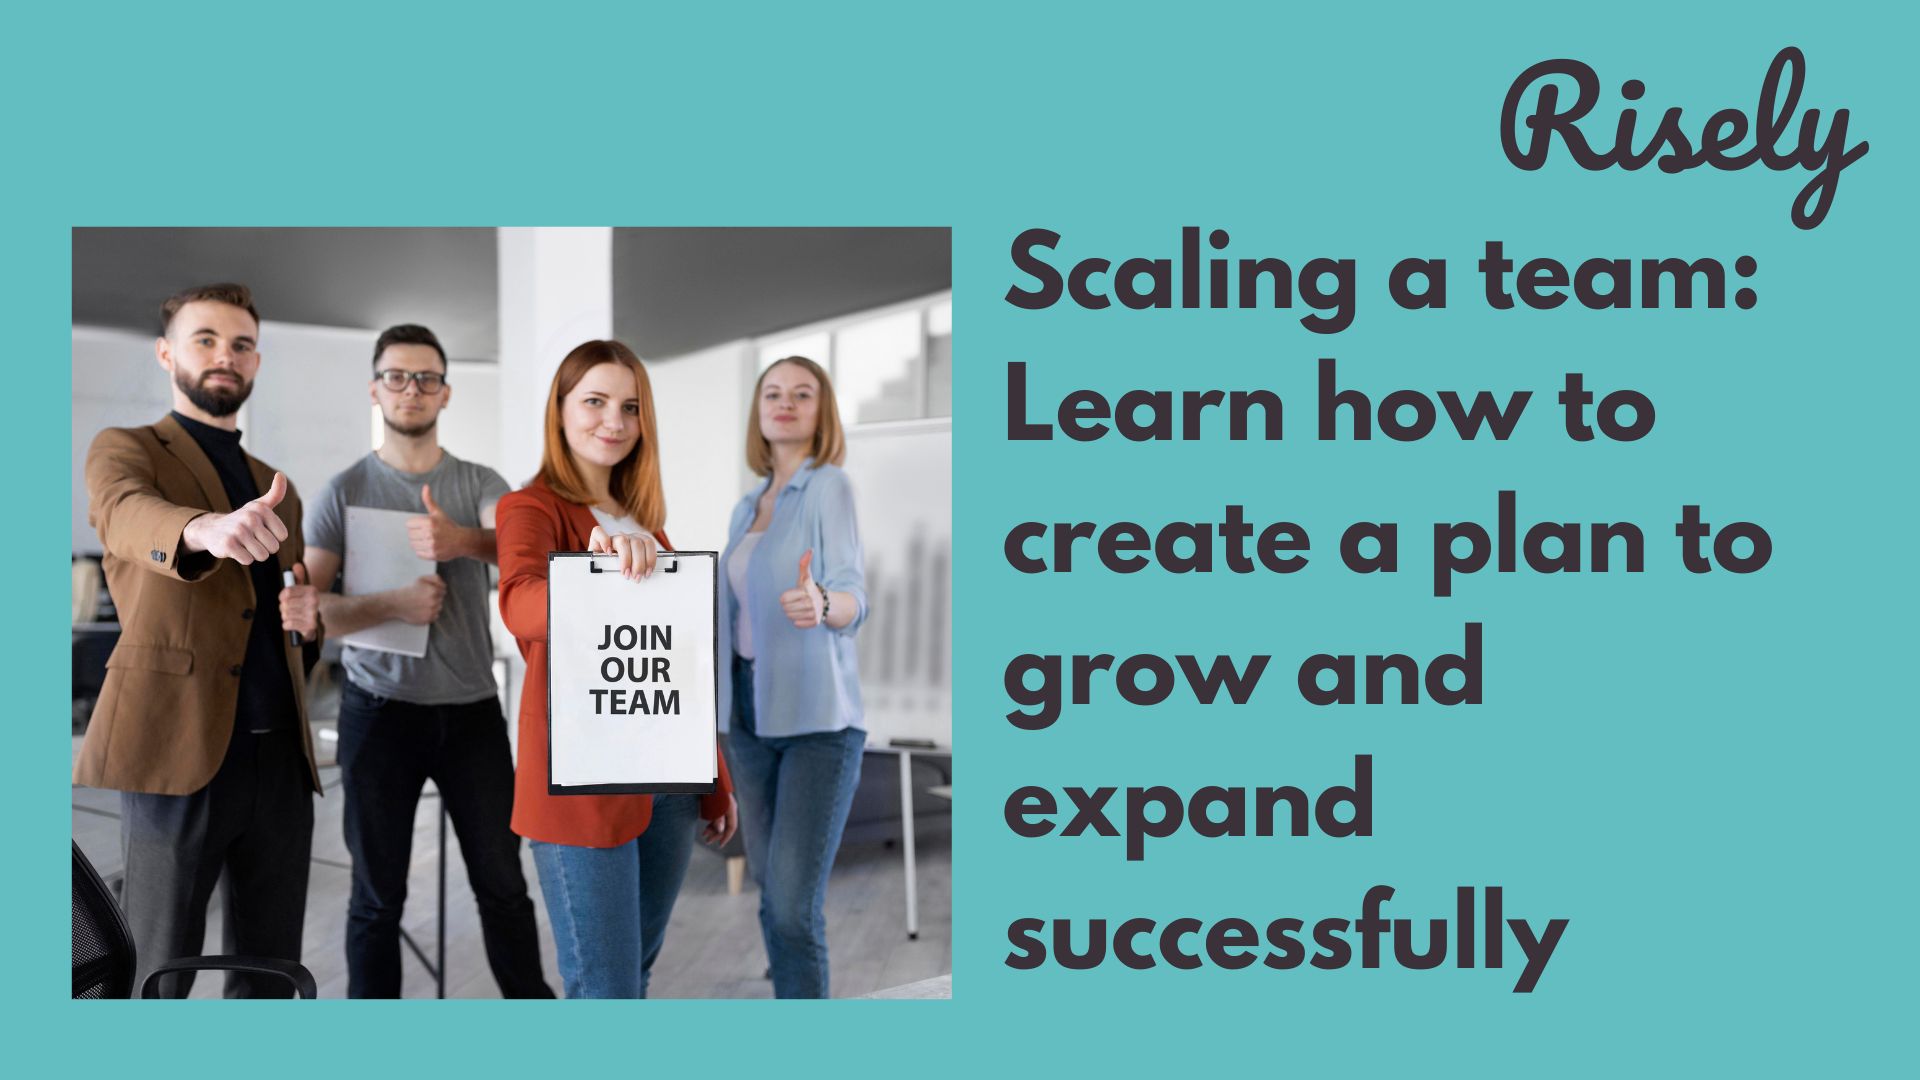 Scaling a team: Learn how to create a plan to grow and expand successfully